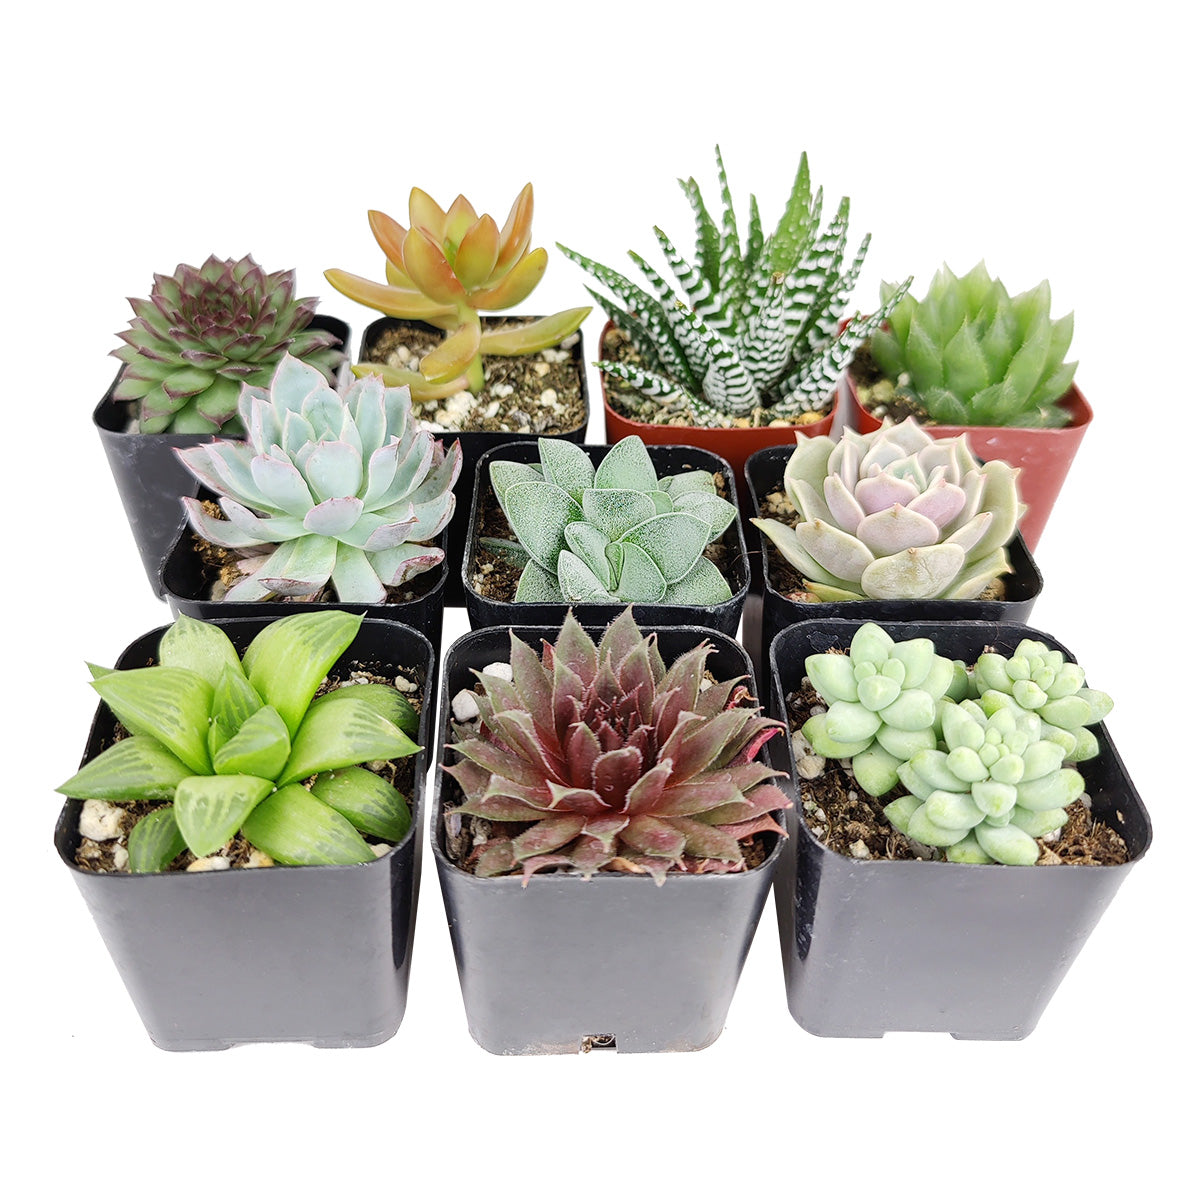 Assorted Collection of Live Succulents Randomly Picked, Succulents Assorted for sale, Succulents Home Office Decor, Succulents Gift Ideas, Rare Succulents for sale, Types of Succulent Plants with Care Guide